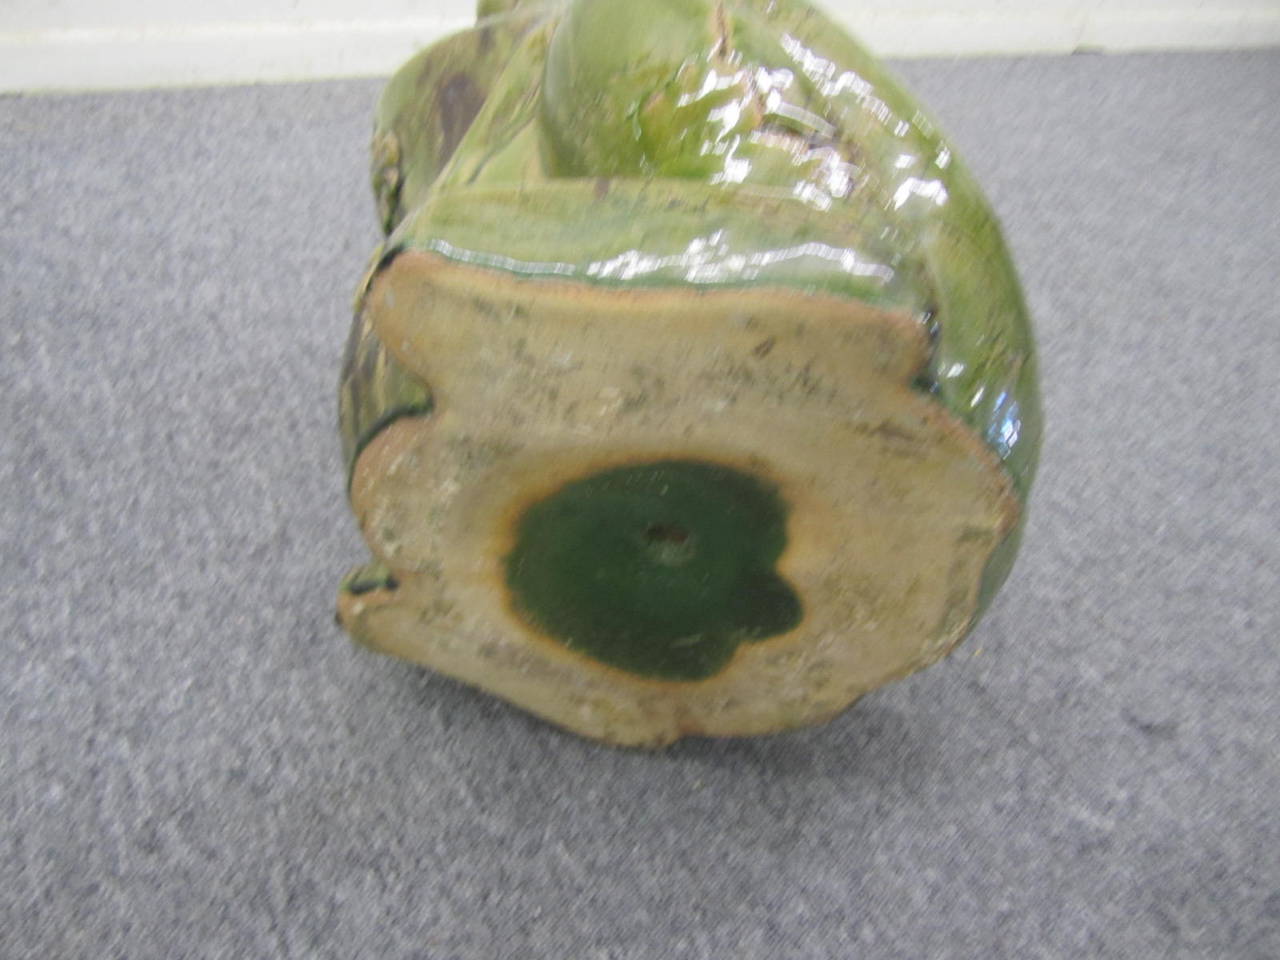 Charming Large Green Glaze Pottery Frog Planter Mid-Century Modern In Good Condition For Sale In Pemberton, NJ